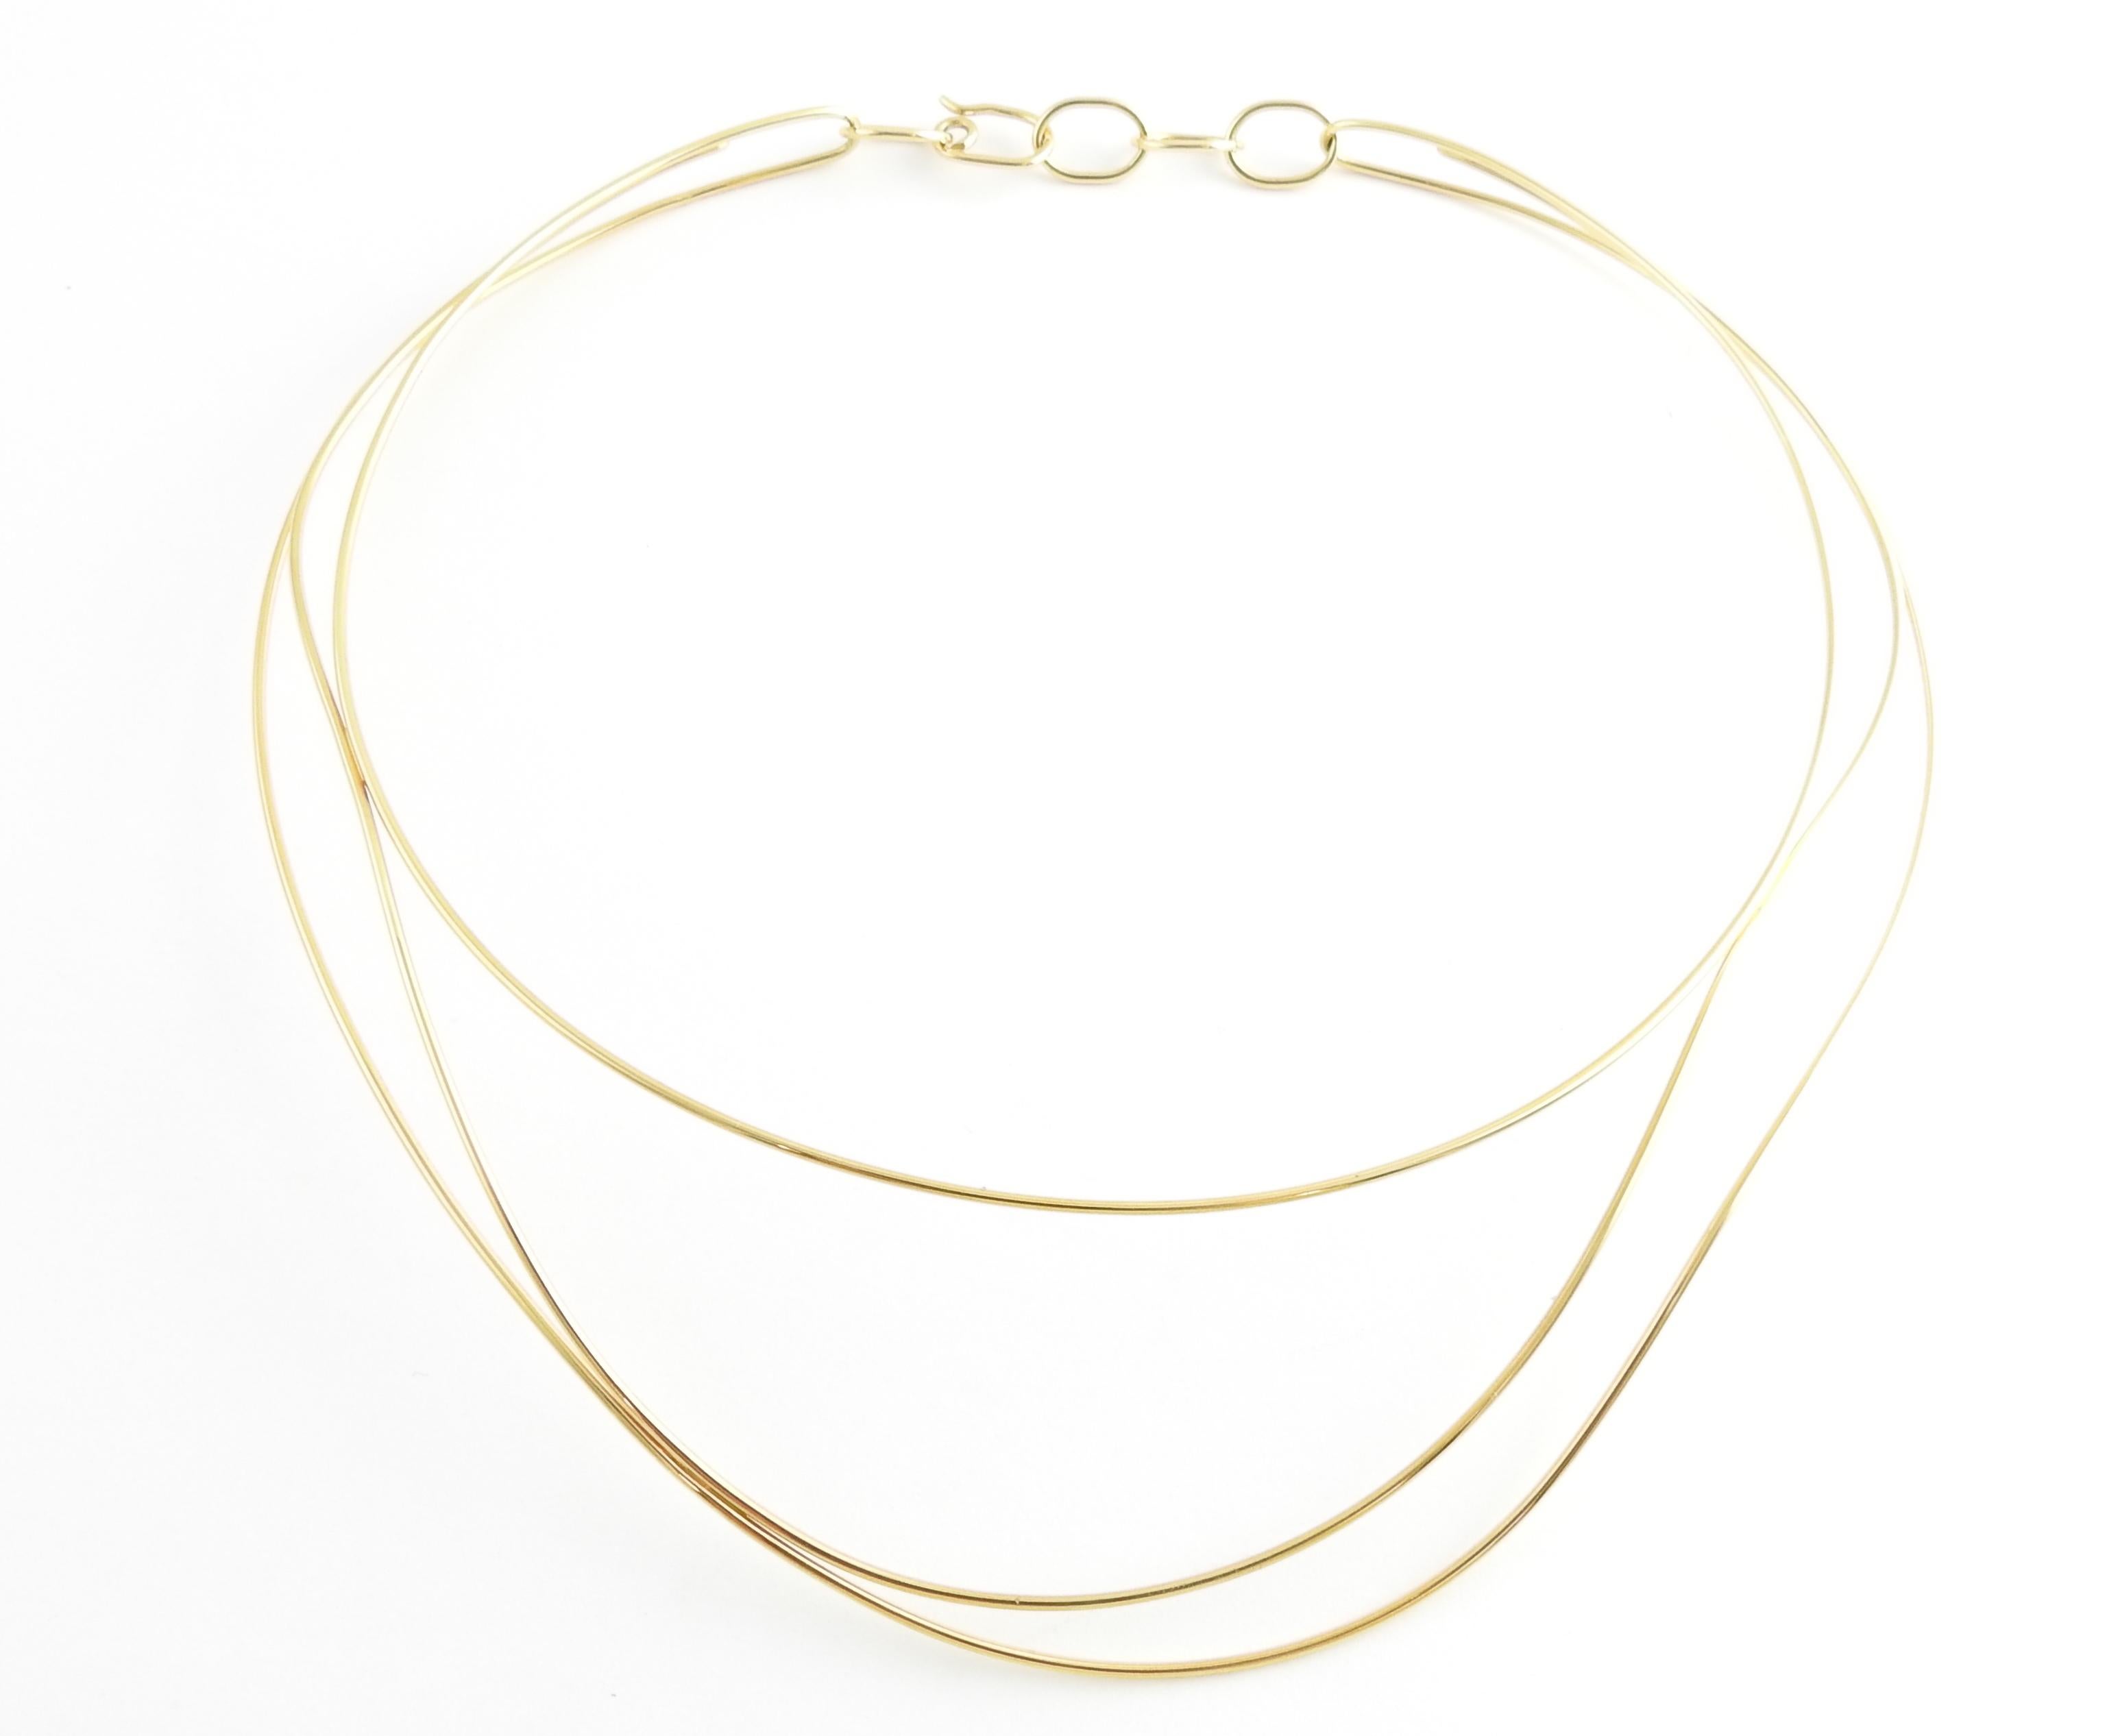 Tiffany & Co. Elsa Peretti 18K Yellow Gold Abstract Wire Choker

This authentic Tiffany & Co. Choker is 16